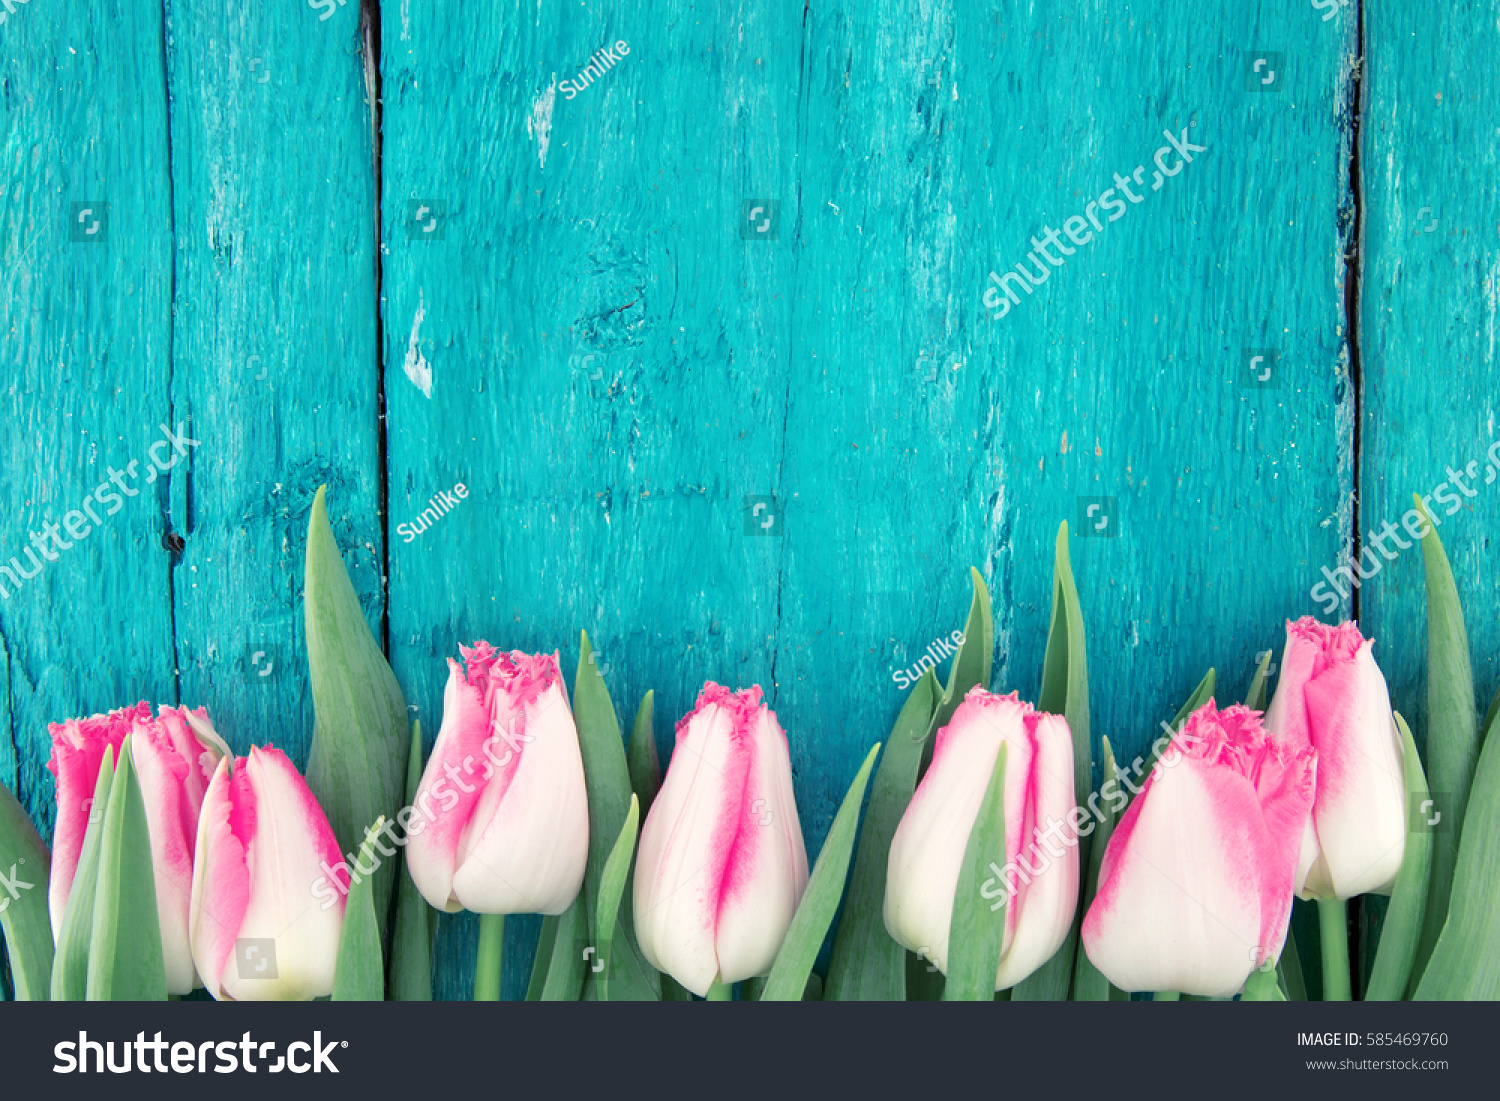 Frame of tulips on turquoise rustic wooden background. Spring flowers. Spring background. Greeting card for Valentine's Day, Woman's Day and Mother's Day. Top view. #585469760